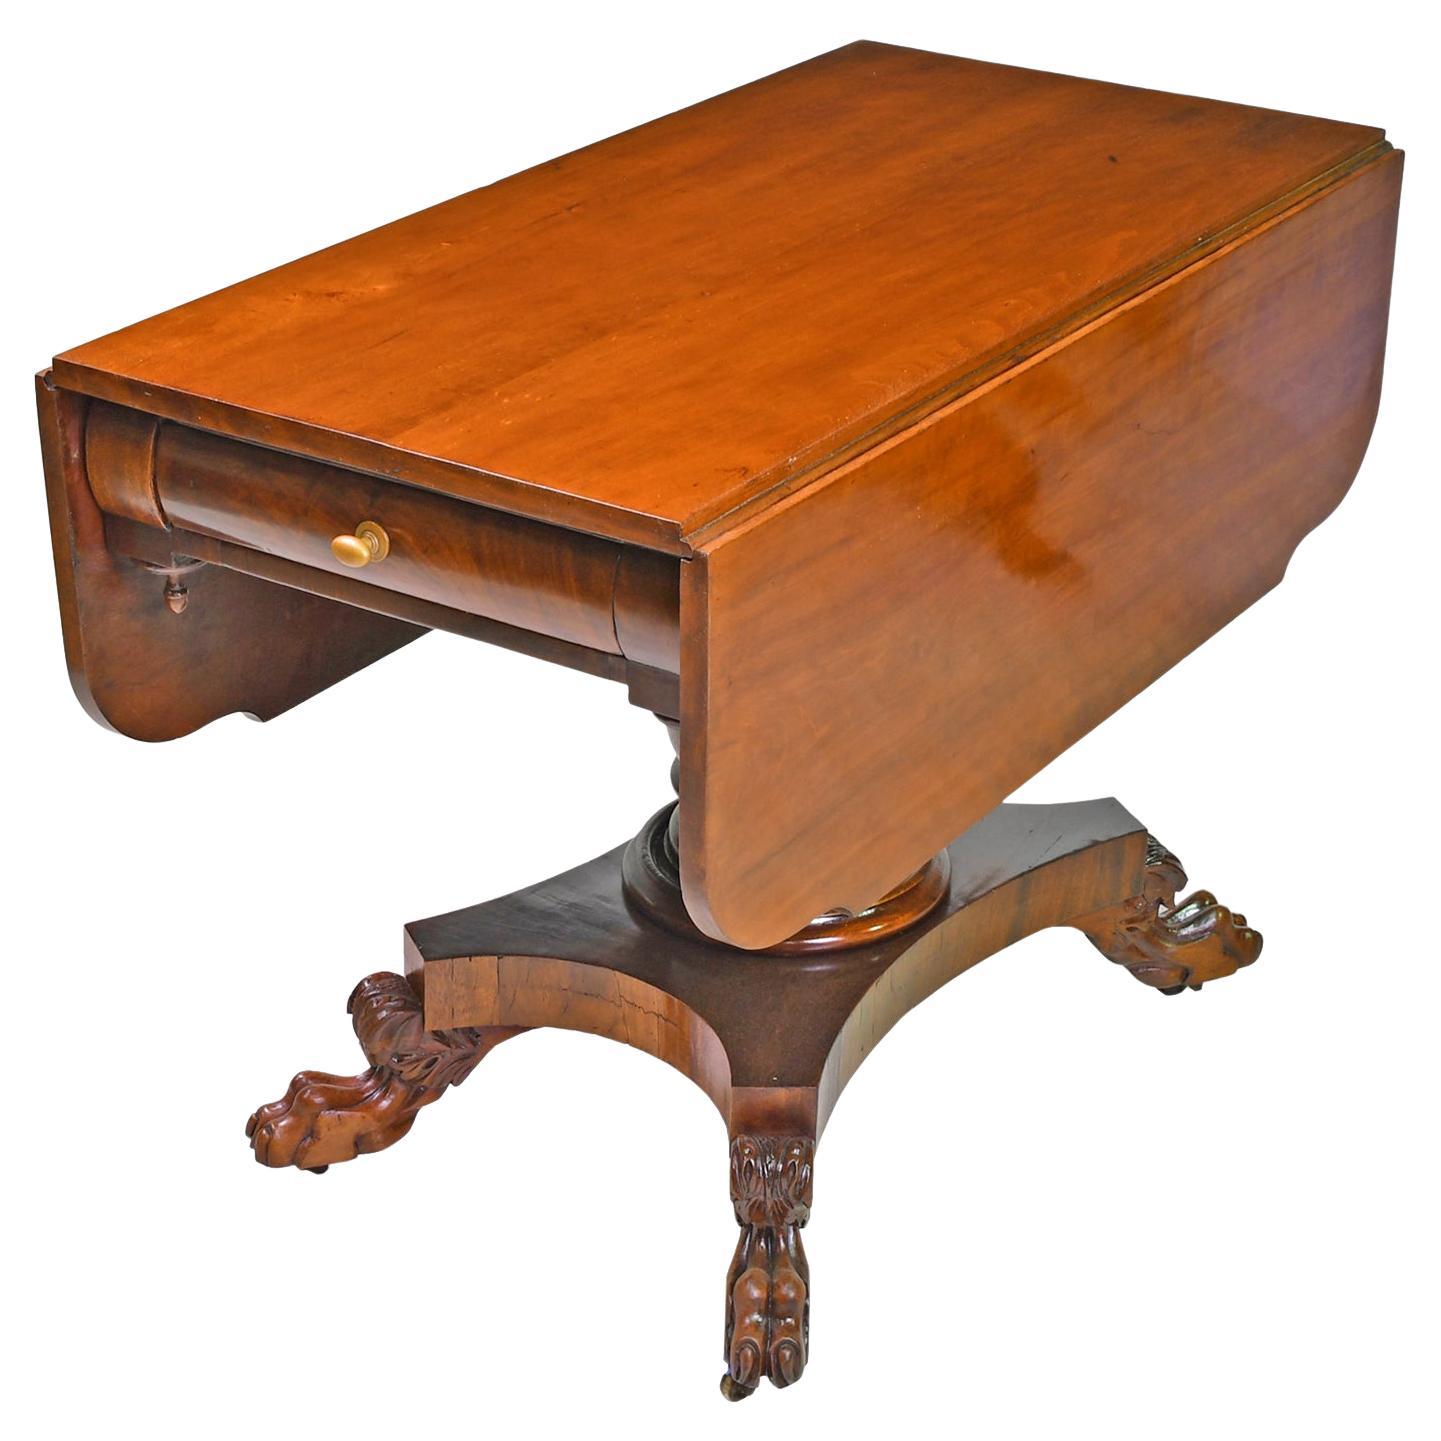 Early American Empire Drop-Leaf/ Pembroke Table in West Indies Mahogany, c. 1830 For Sale